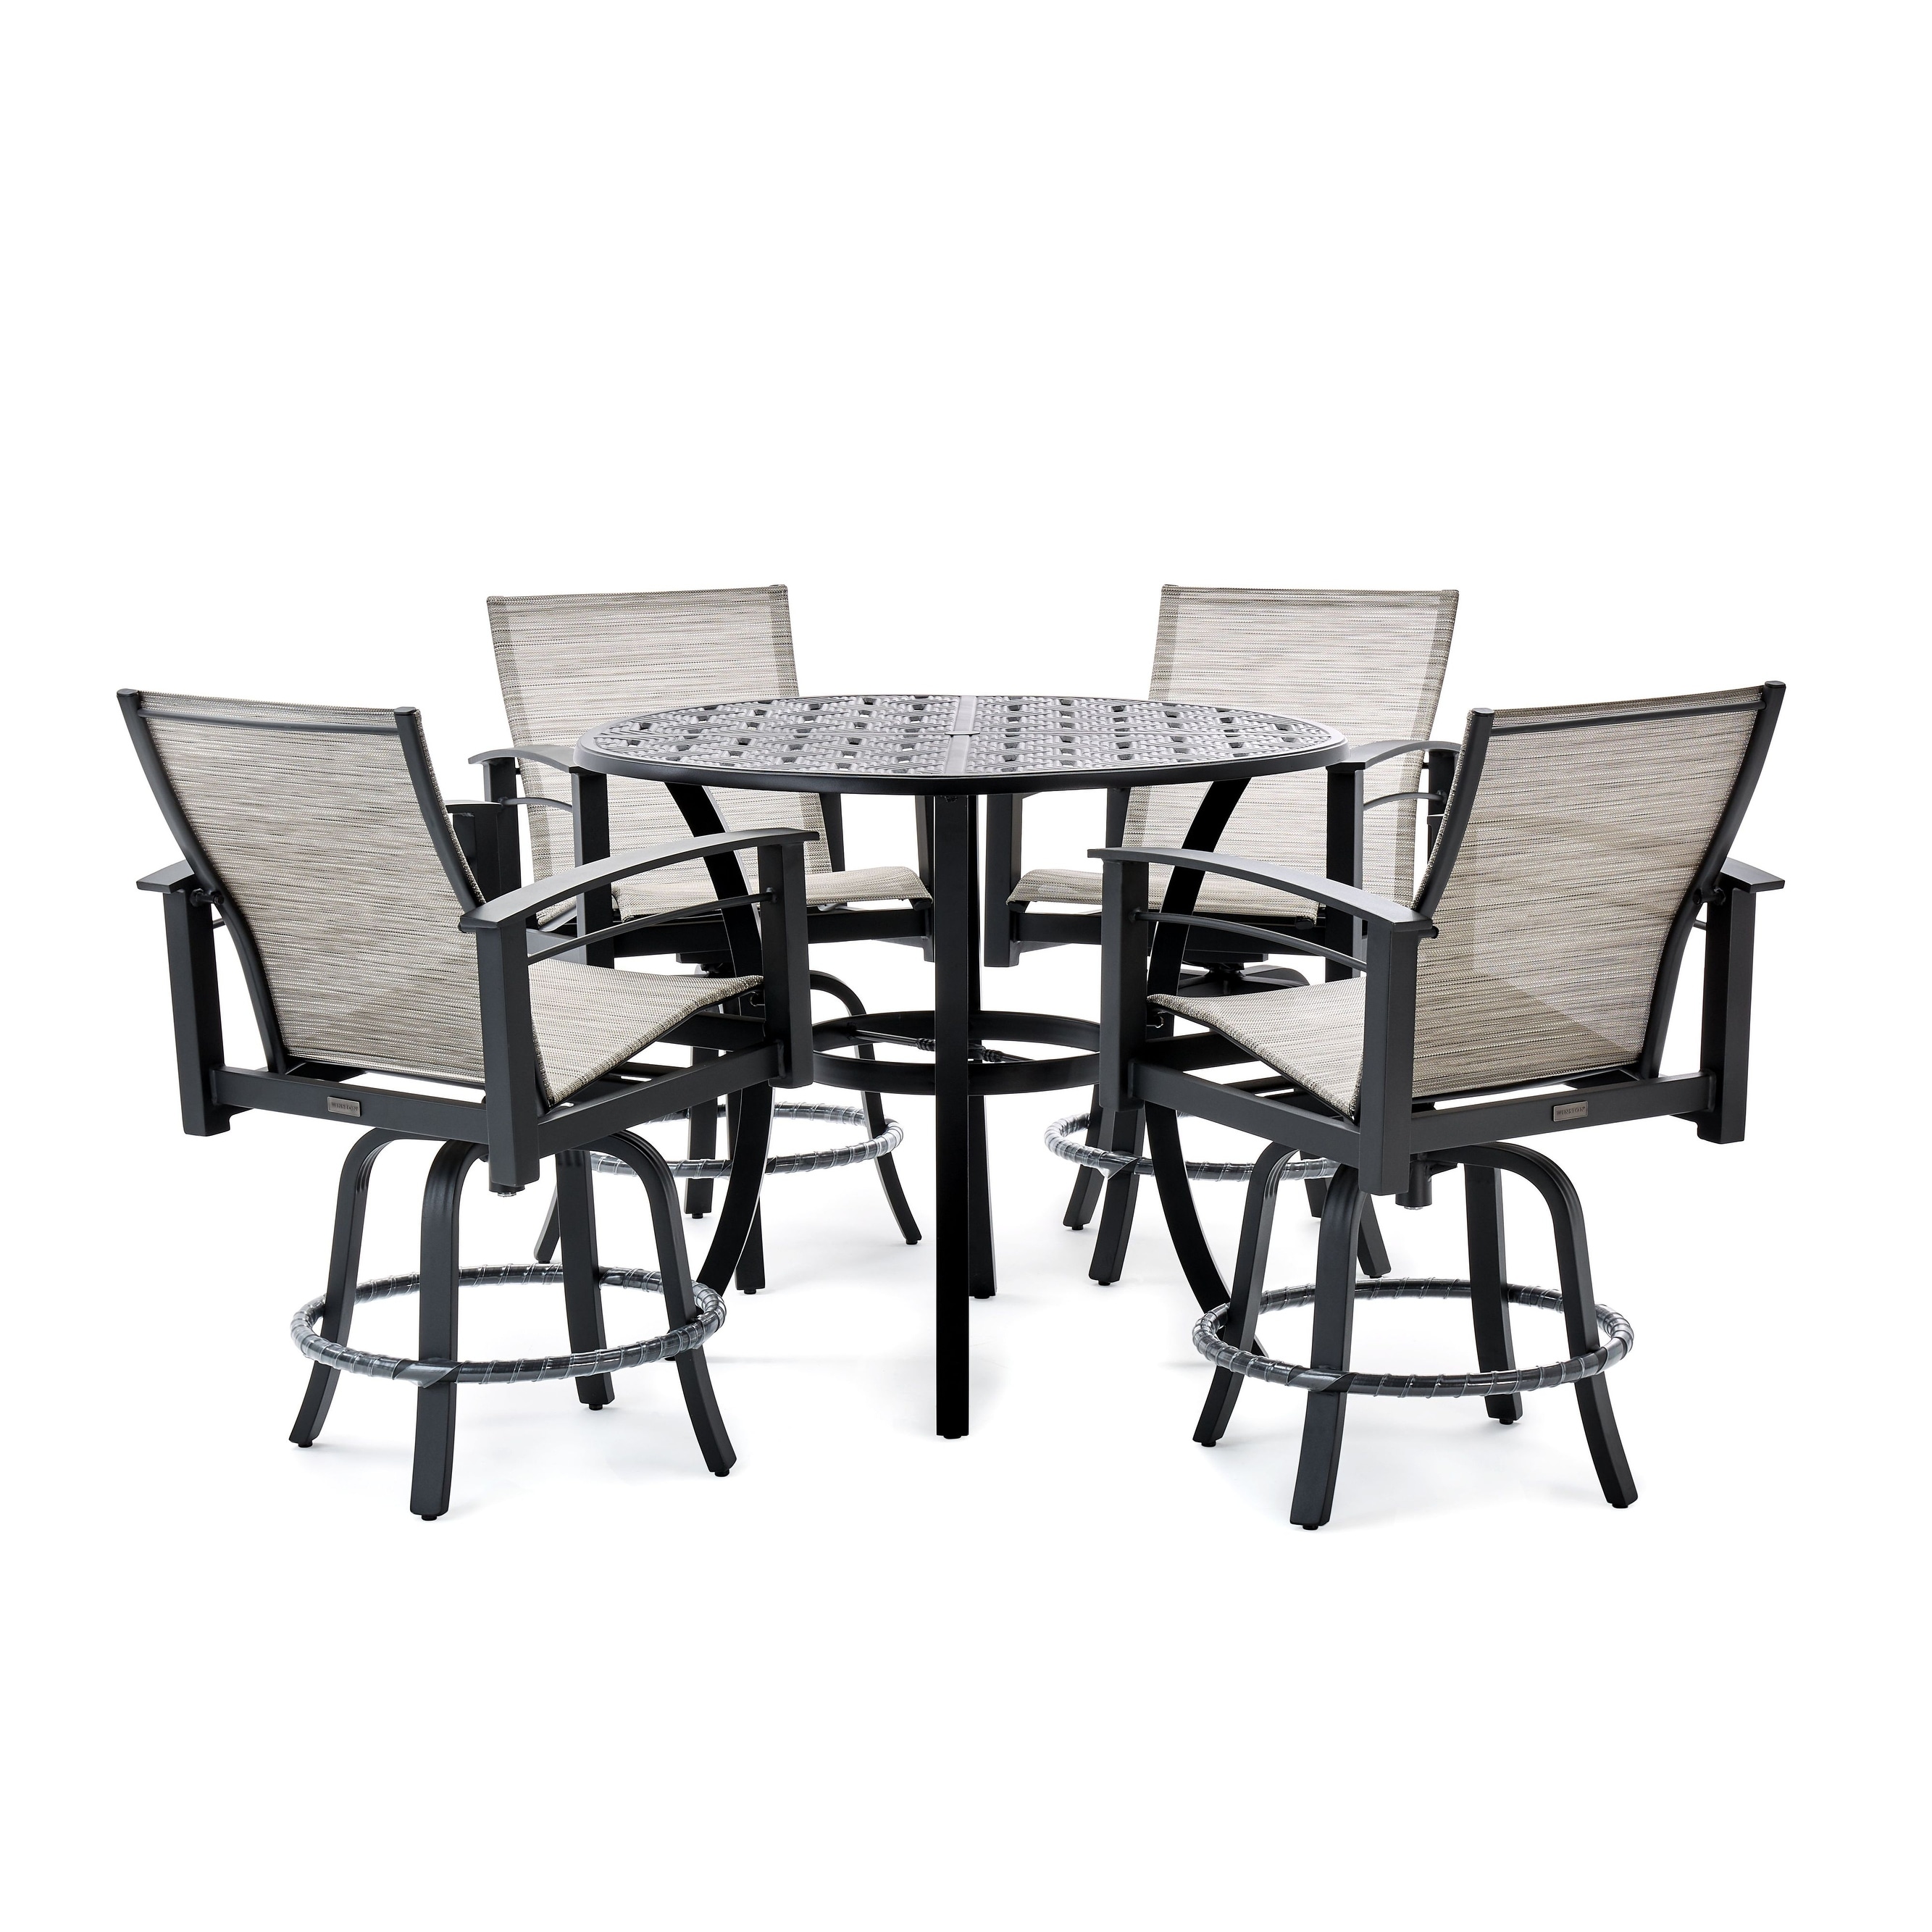 Stanford Sling 5pc Balcony Set (4 Swivel Chairs  Round Table)